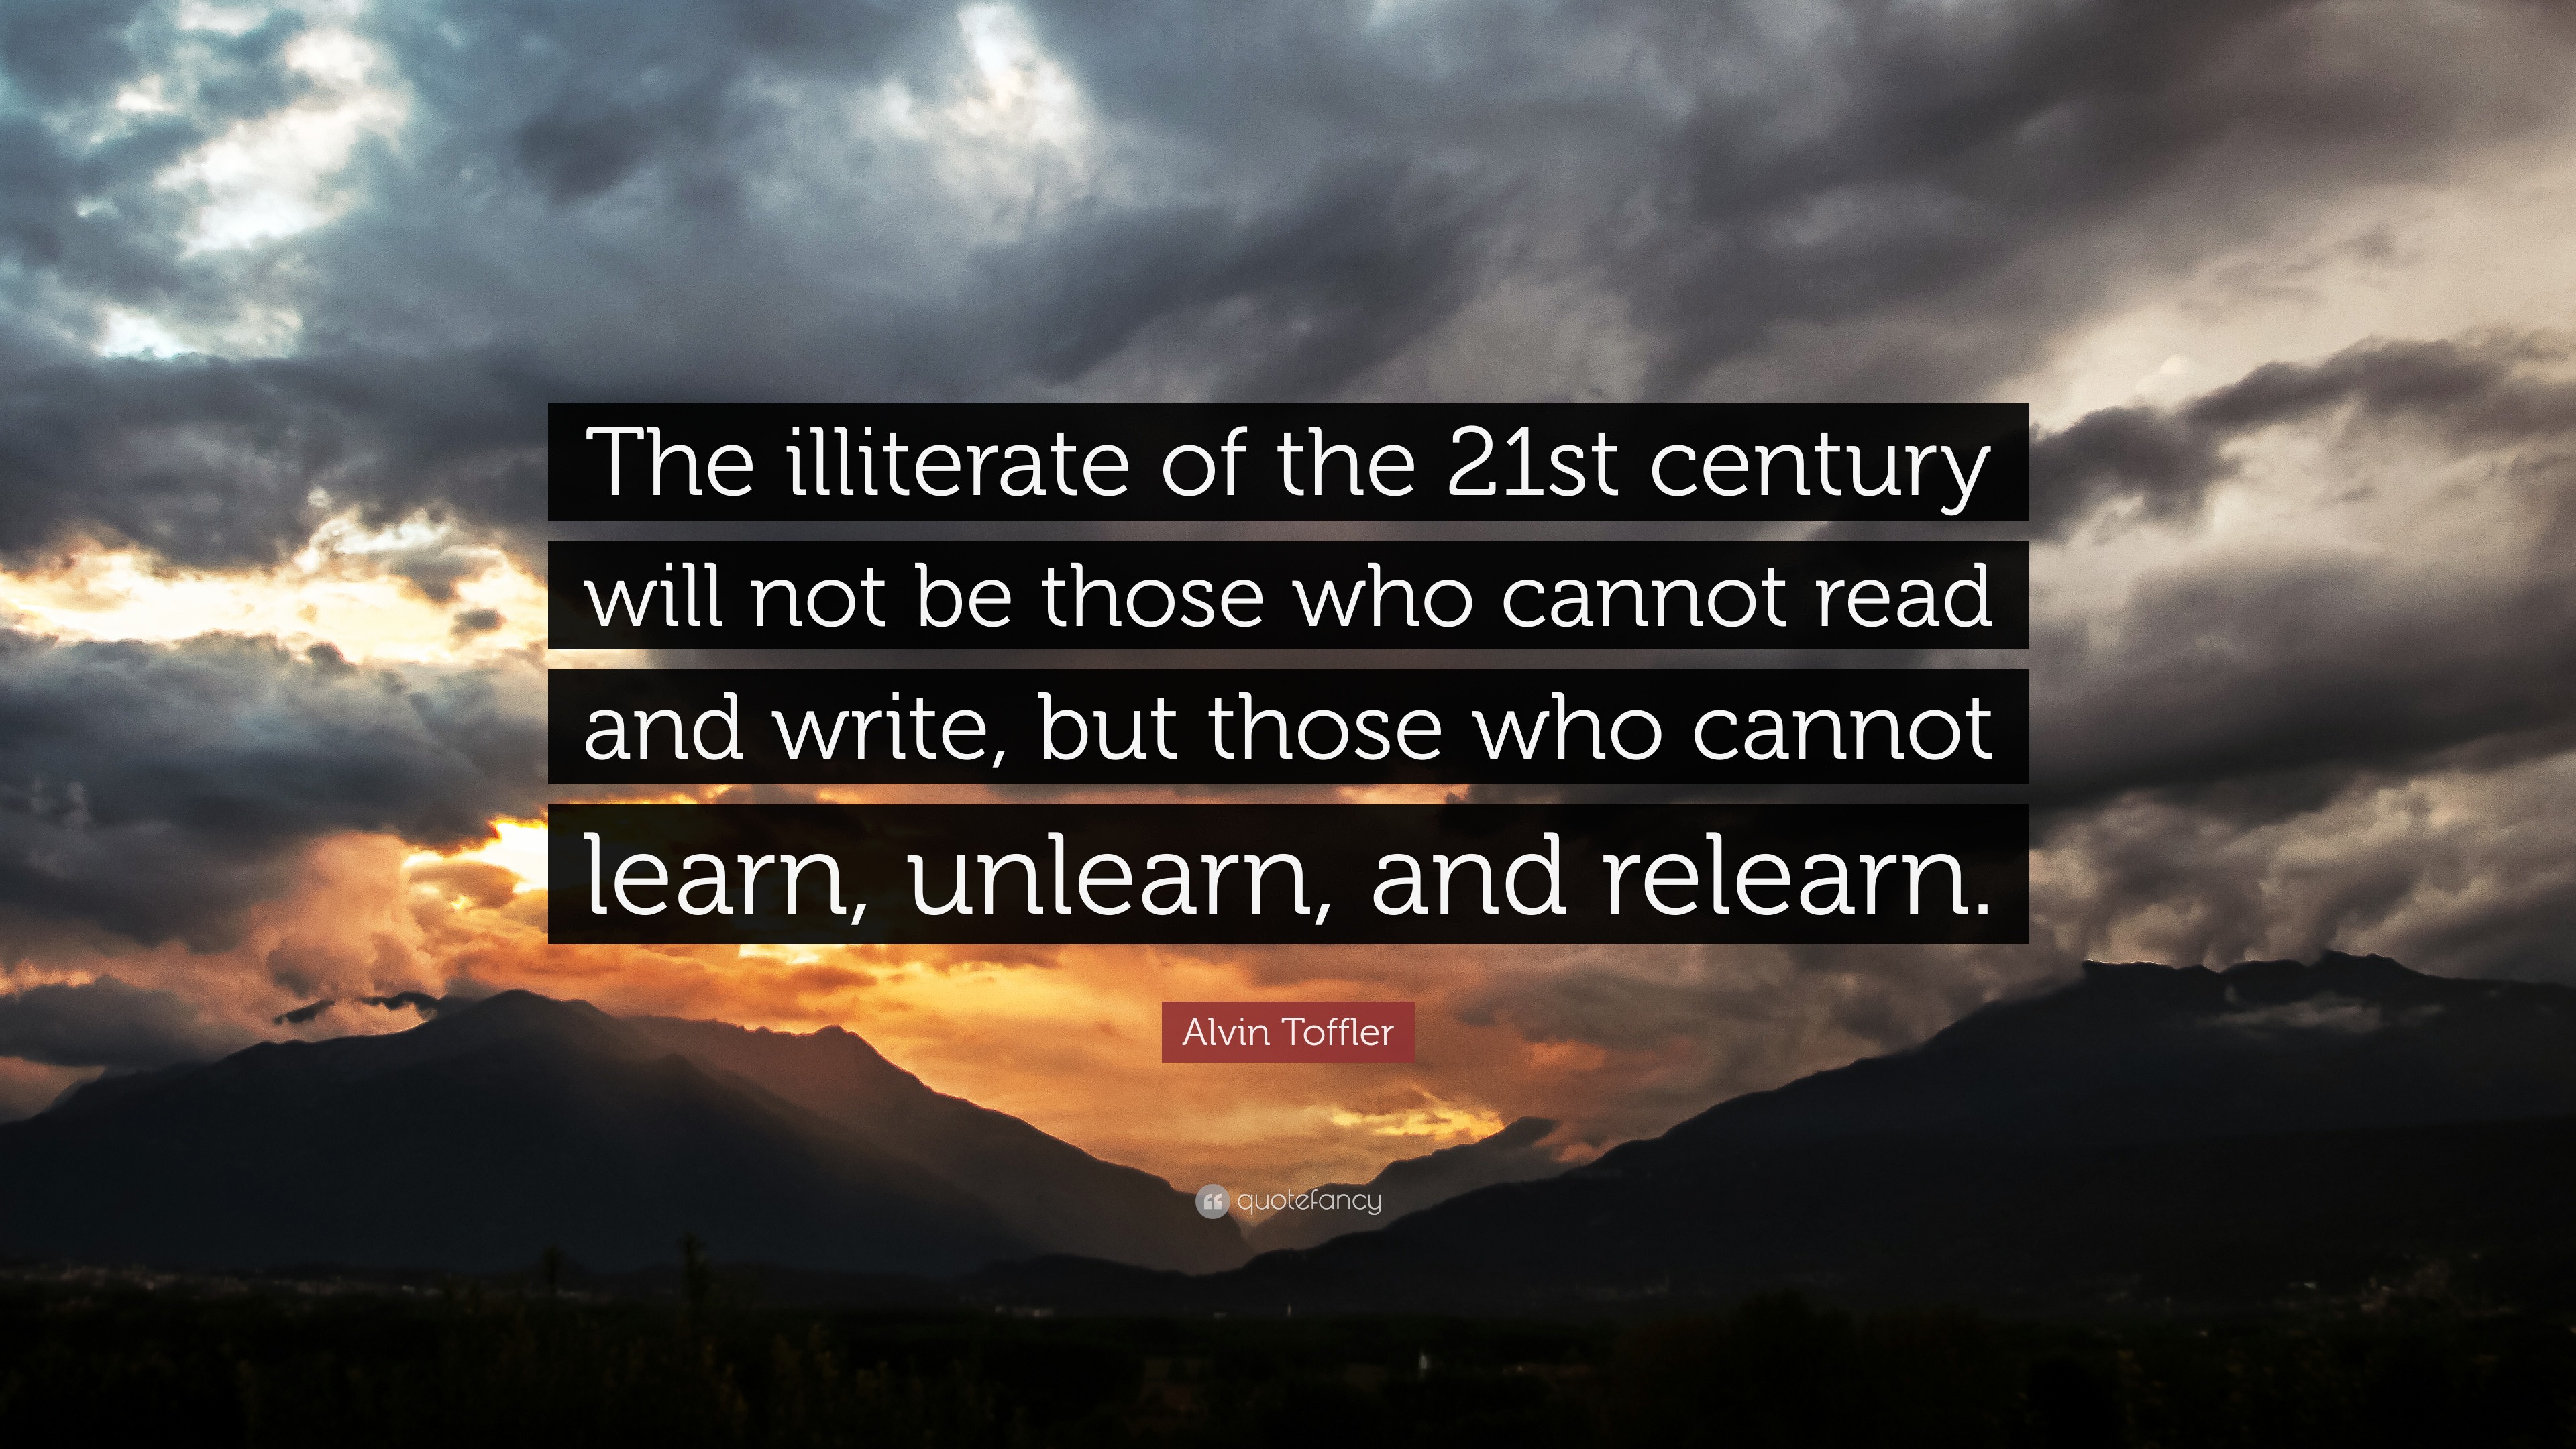 Alvin Toffler Quote: “The illiterate of the 21st century will not be